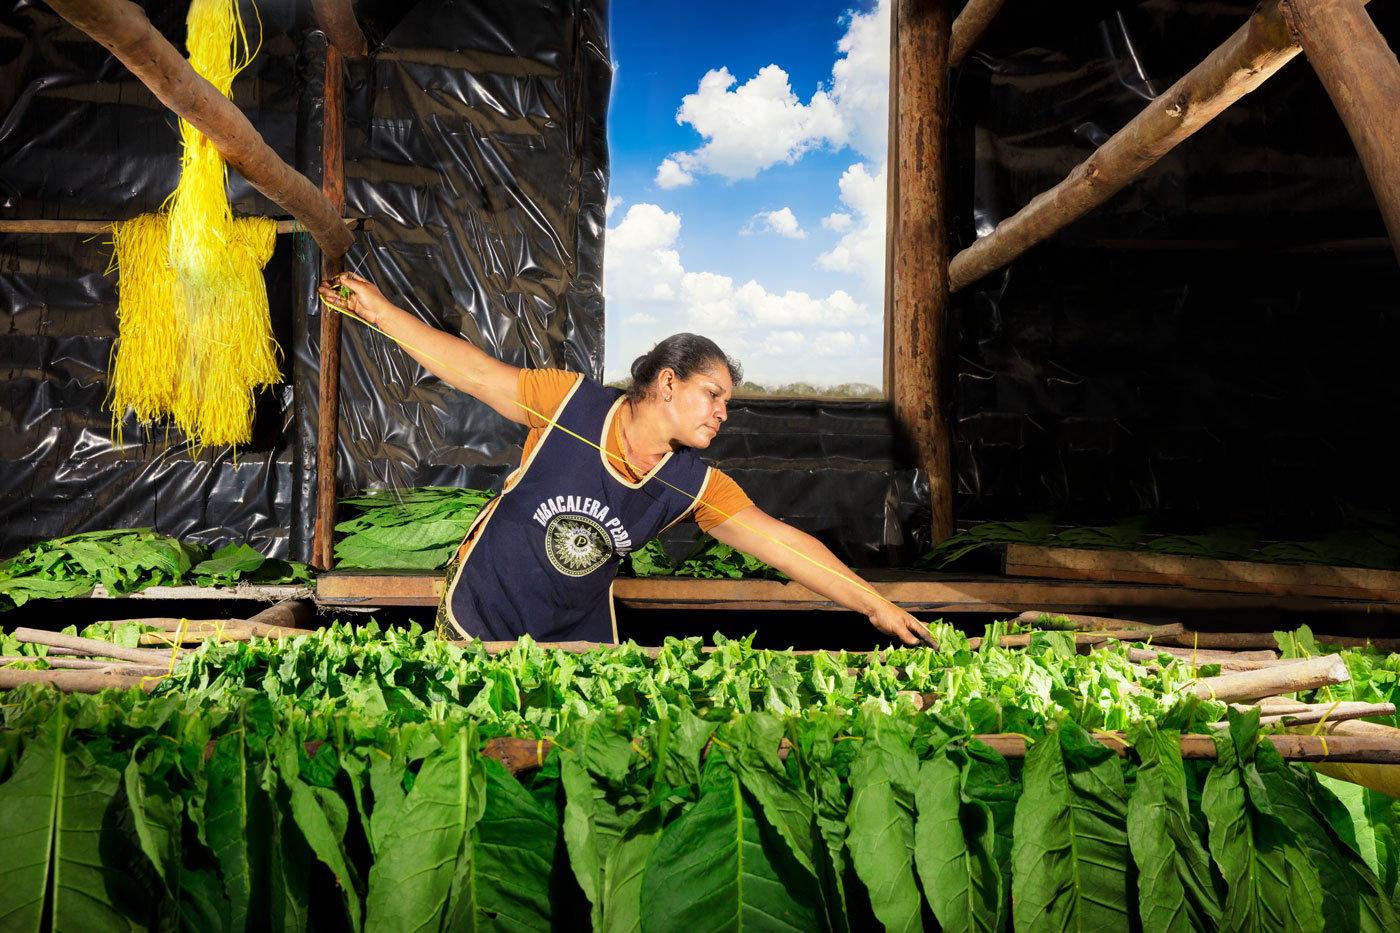 Stringing Tobacco in the Curing Barn